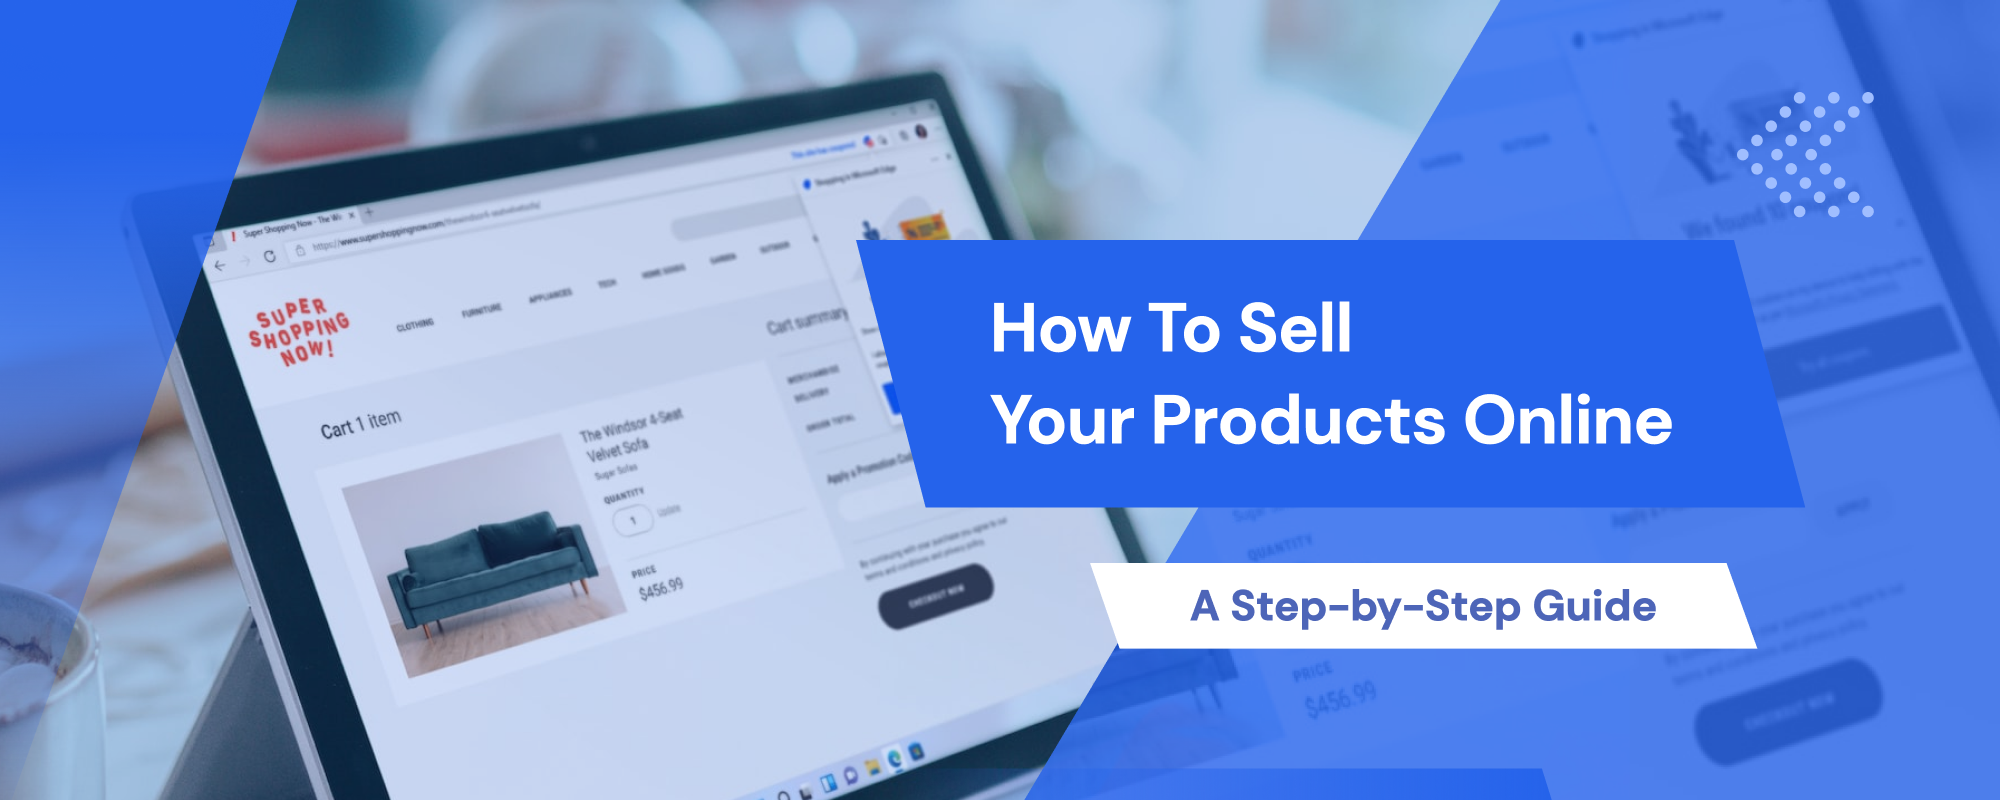 How to Sell your Products Online - Step by Step Guide